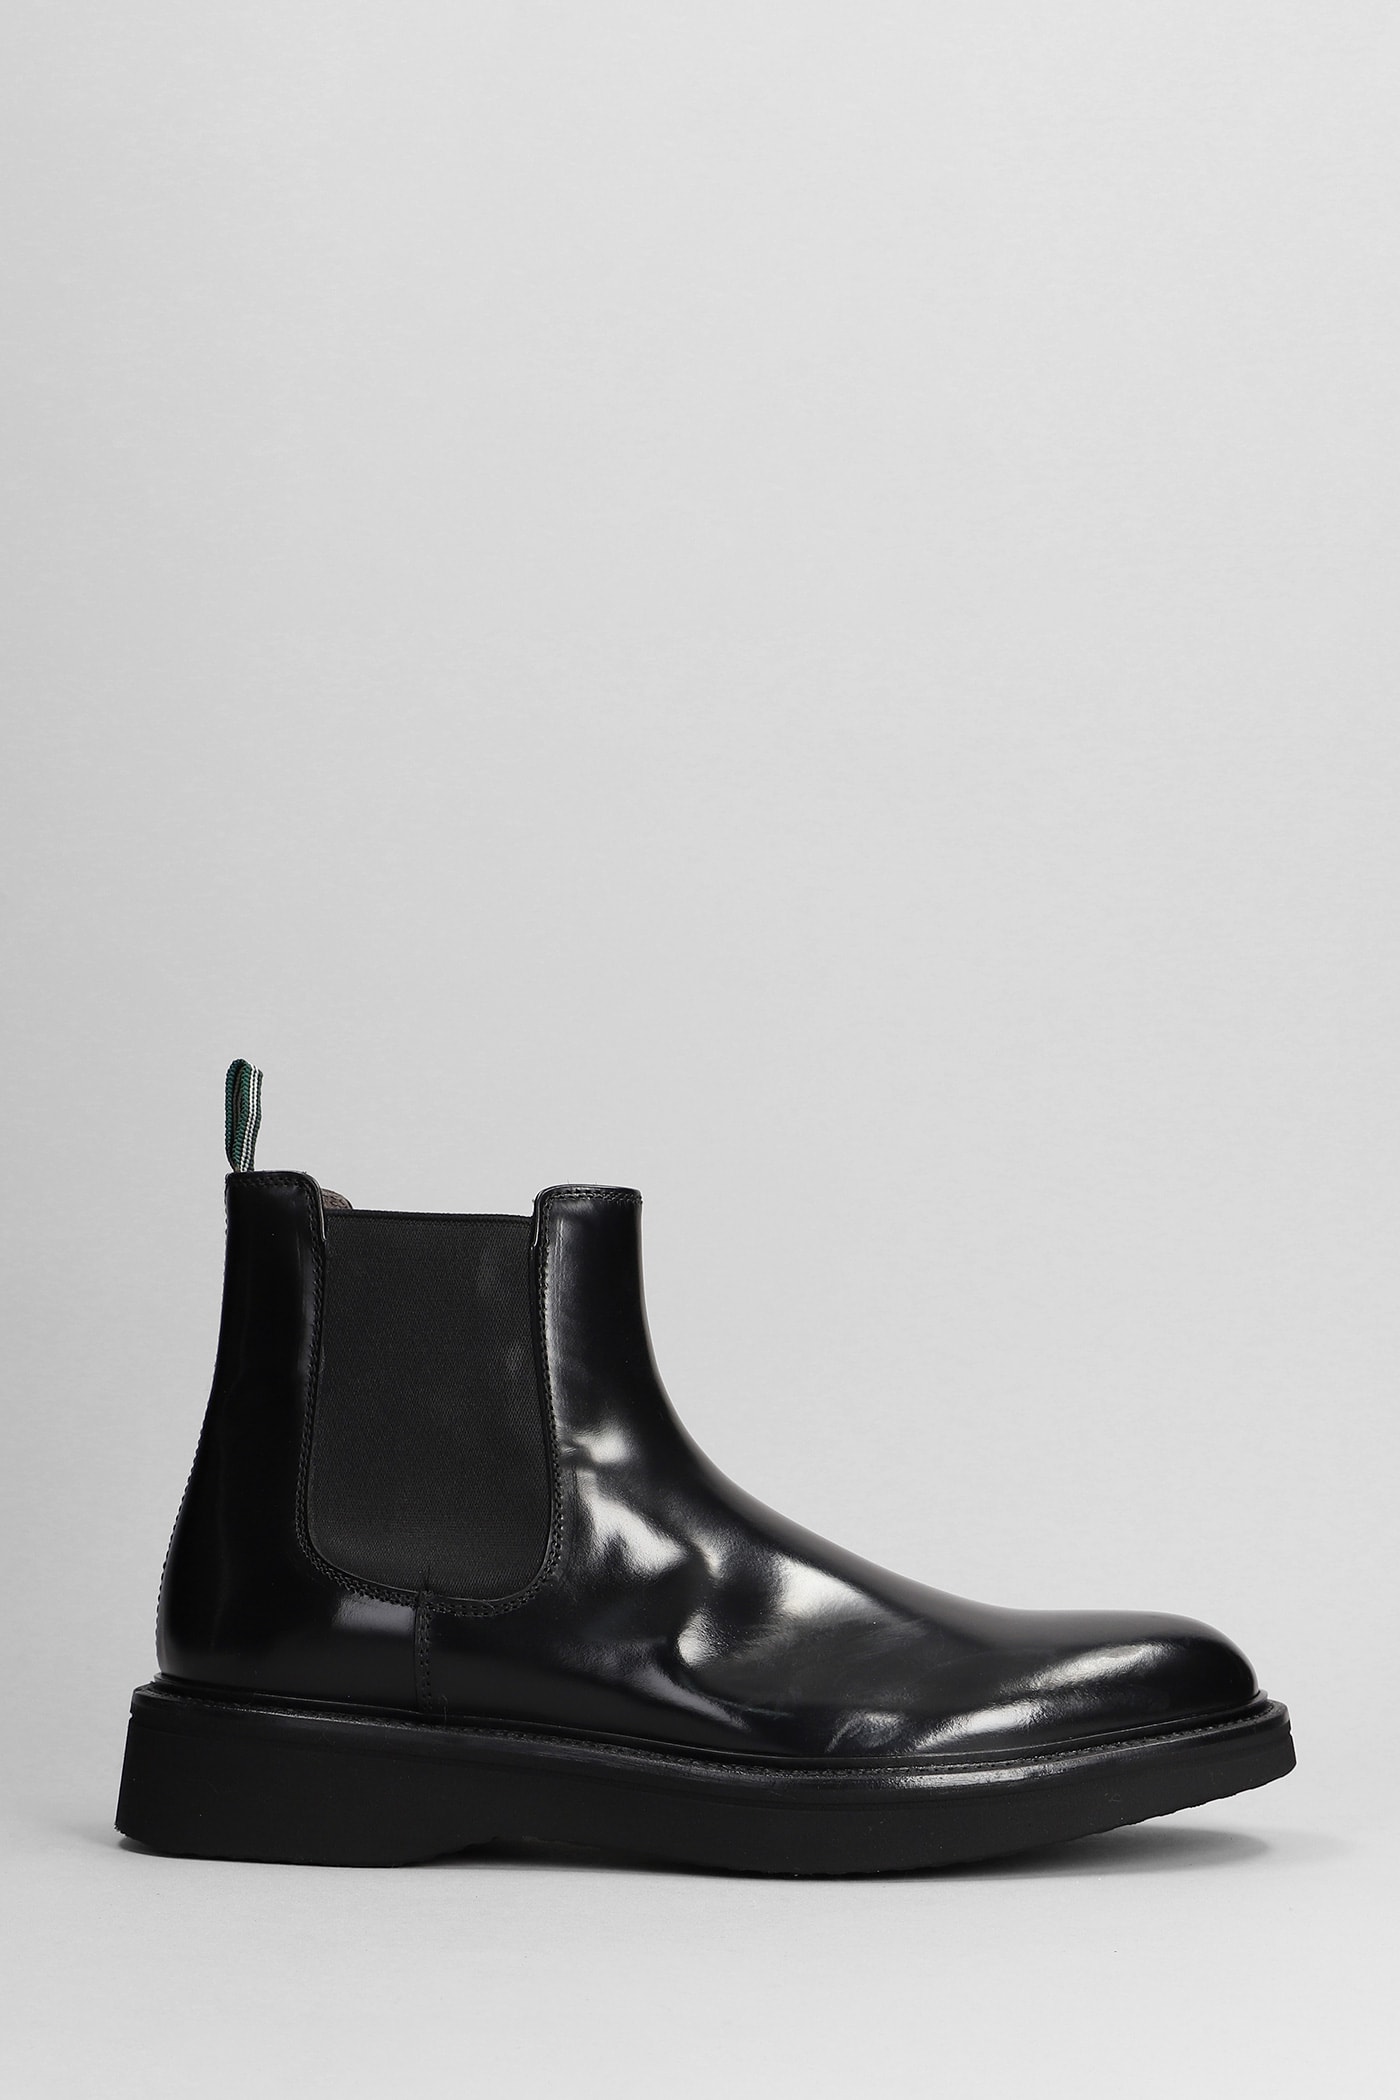 GREEN GEORGE LOW HEELS ANKLE BOOTS IN BLACK LEATHER